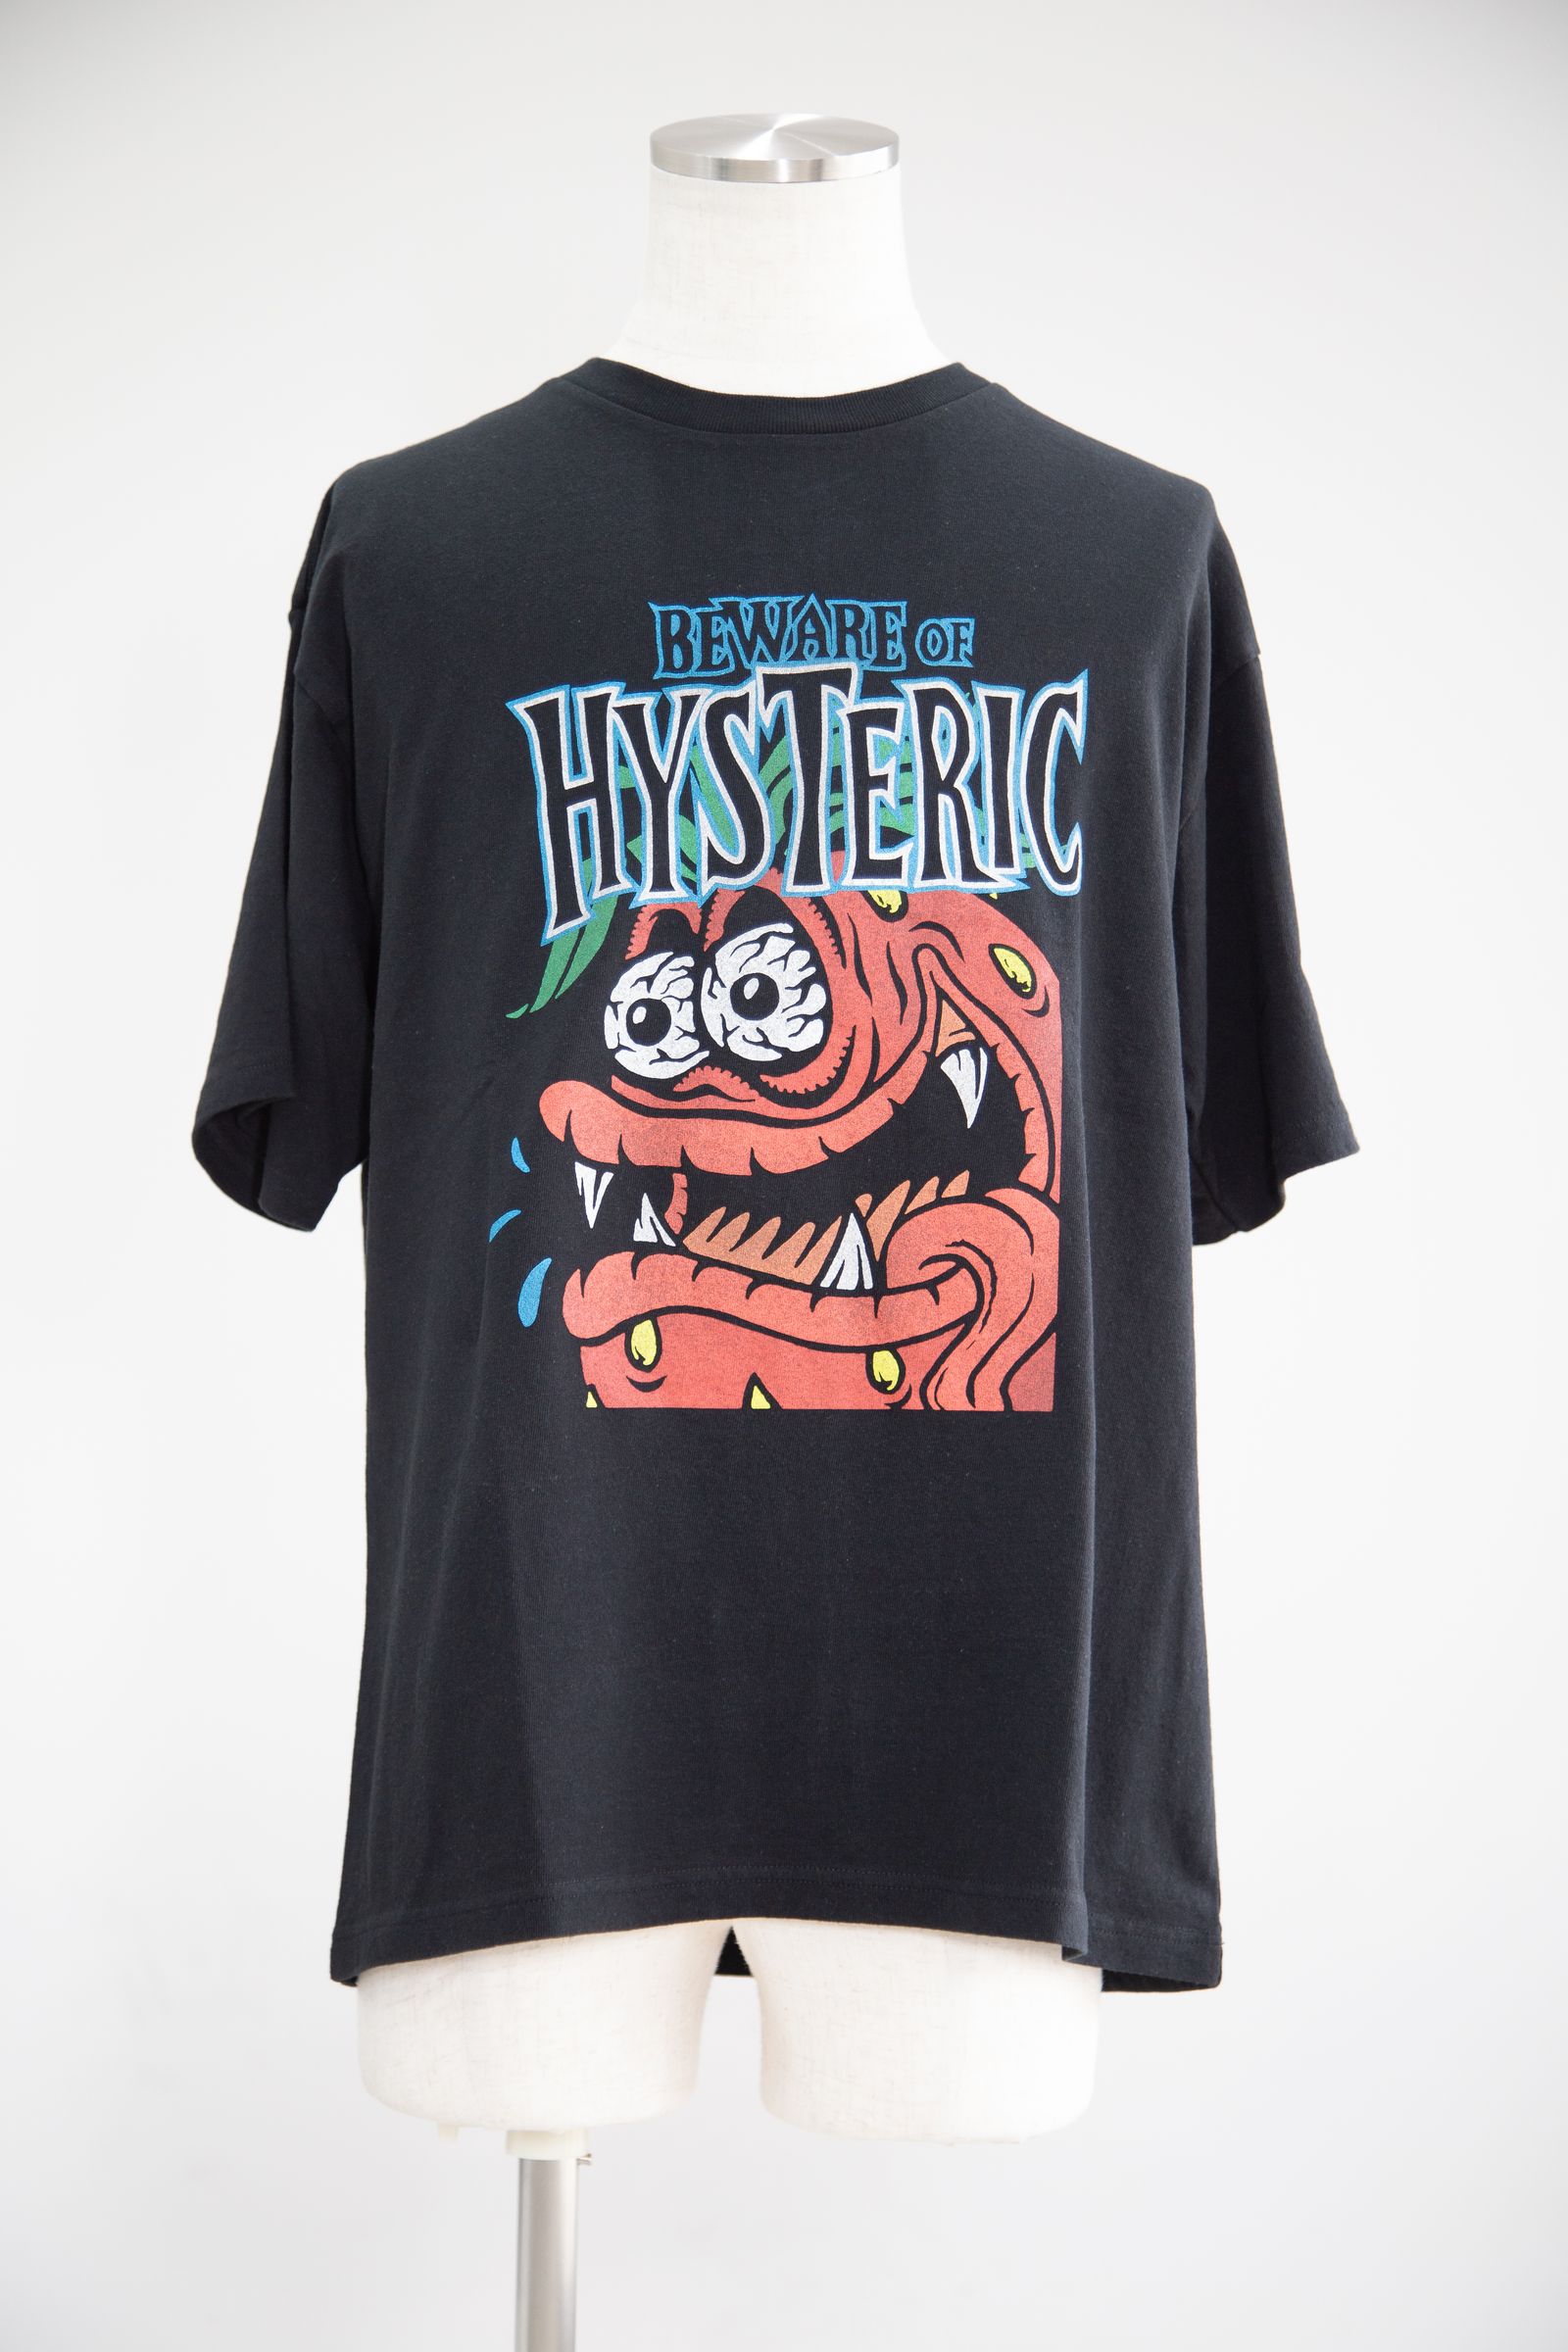 HYSTERIC GLAMOUR - BEWEAR OF HYSTERIC Tシャツ / ブラック | Tempt